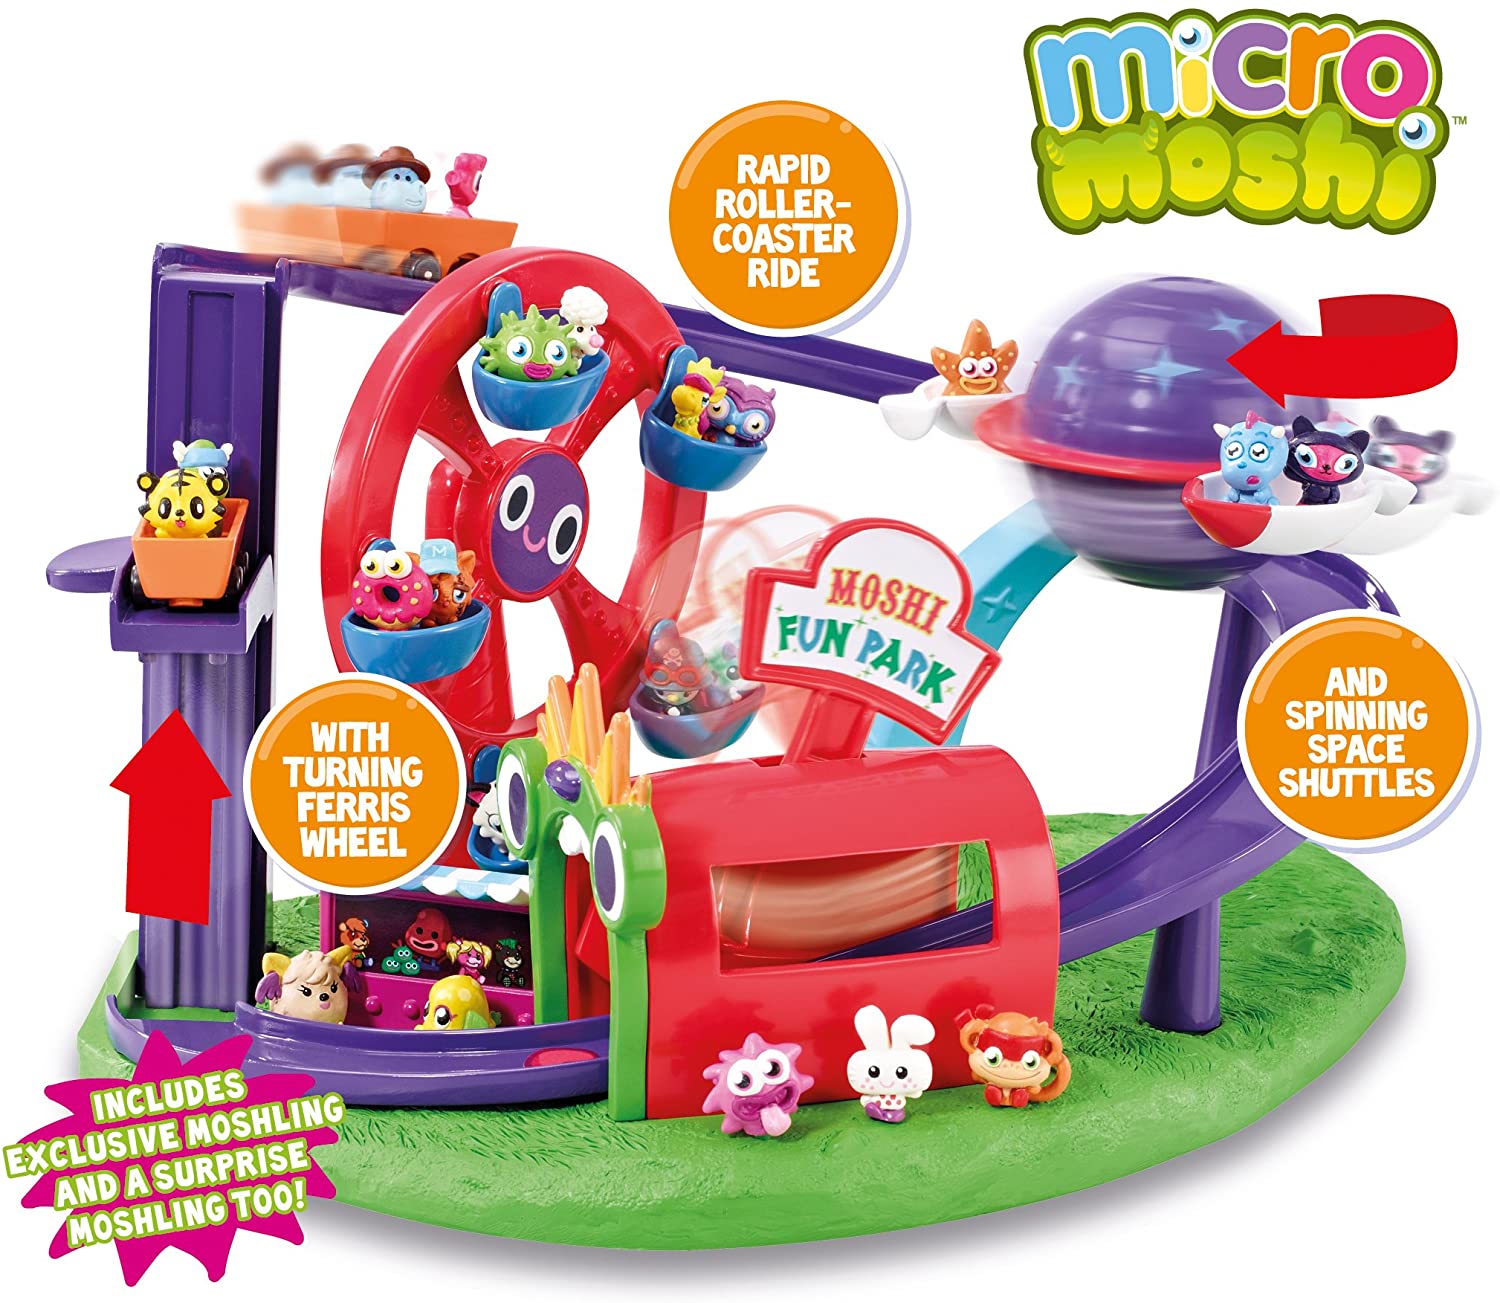 https://static.wikia.nocookie.net/moshimonsters/images/b/b6/Micro_Moshi_Theme_Park_ad.jpg/revision/latest?cb=20200927215209